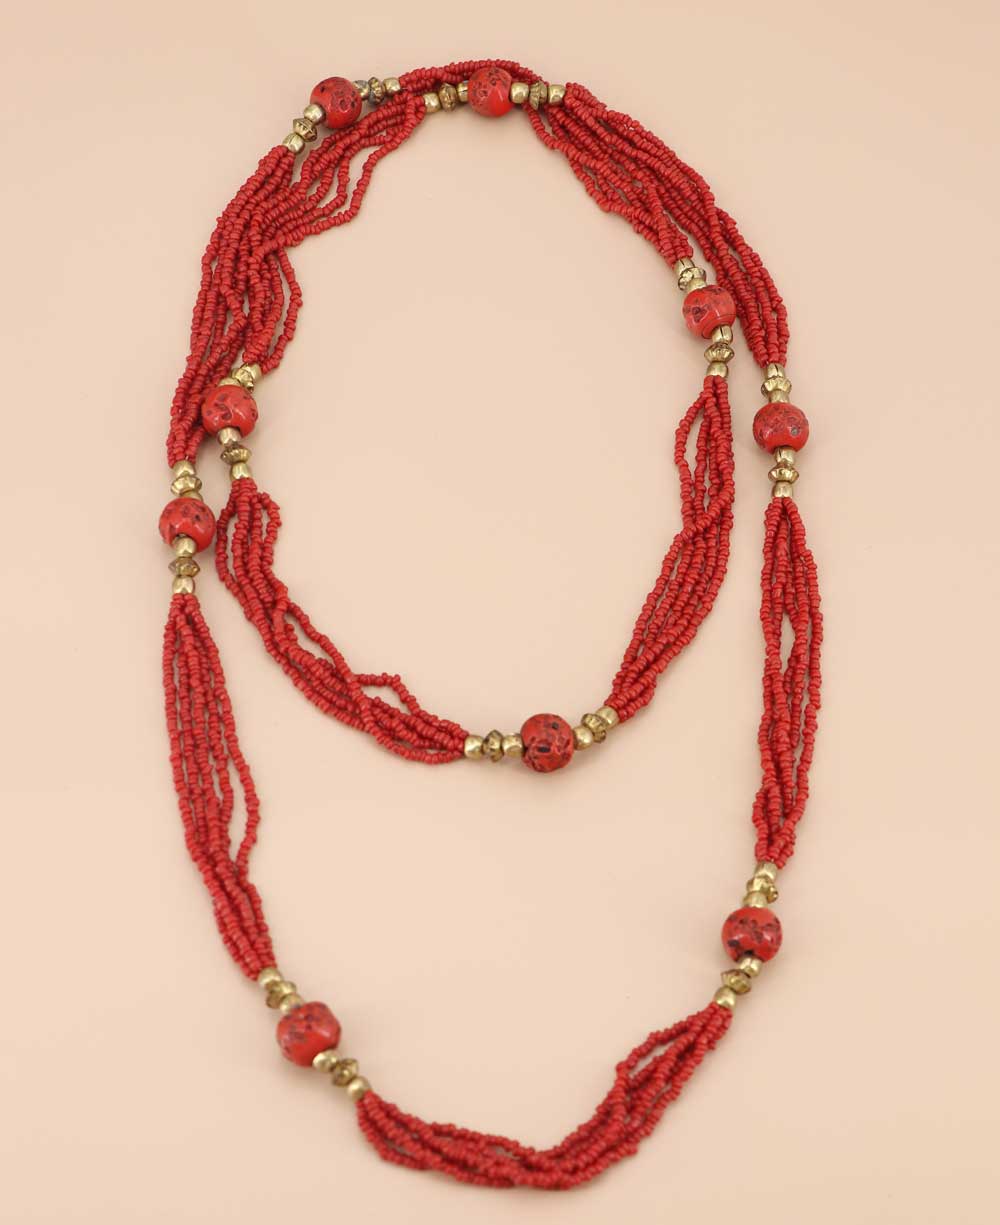 56-inch long beaded necklace